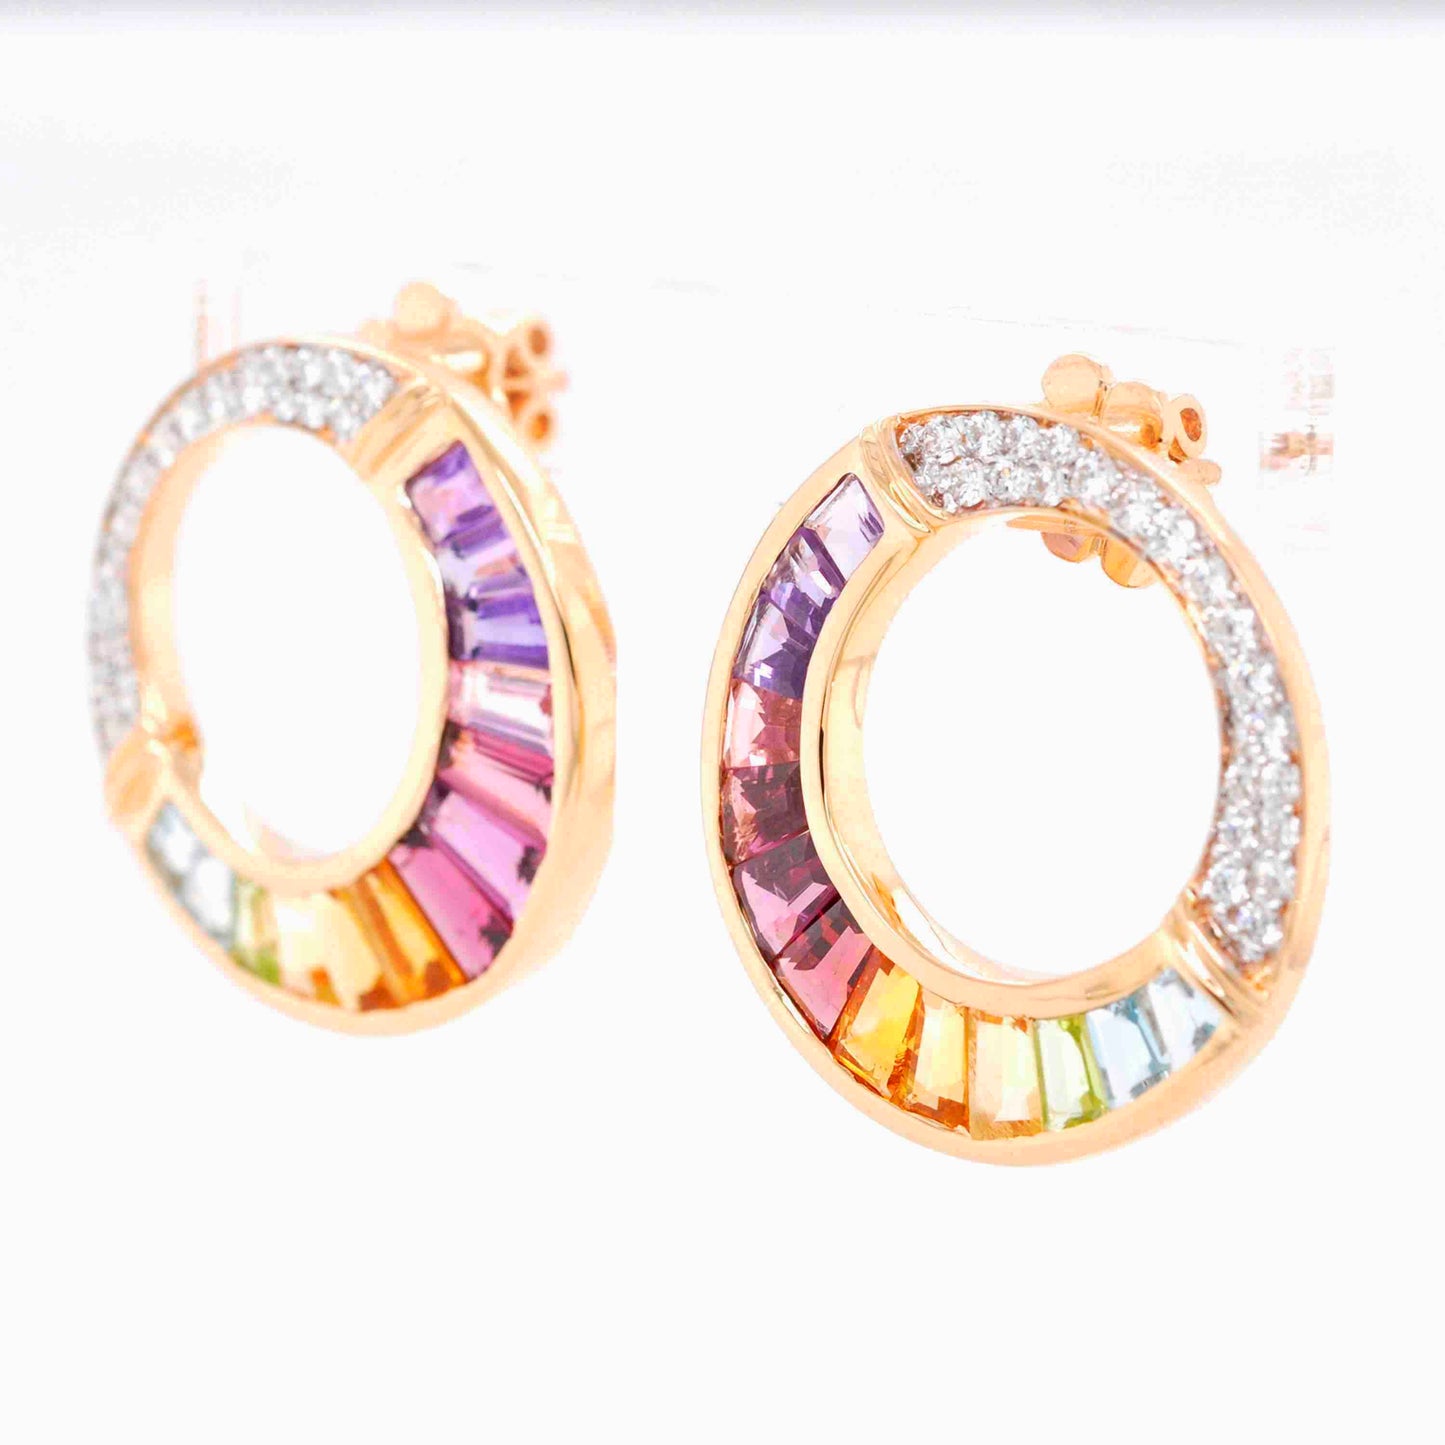 Handcrafted 18K gold stud earrings with rainbow gemstones